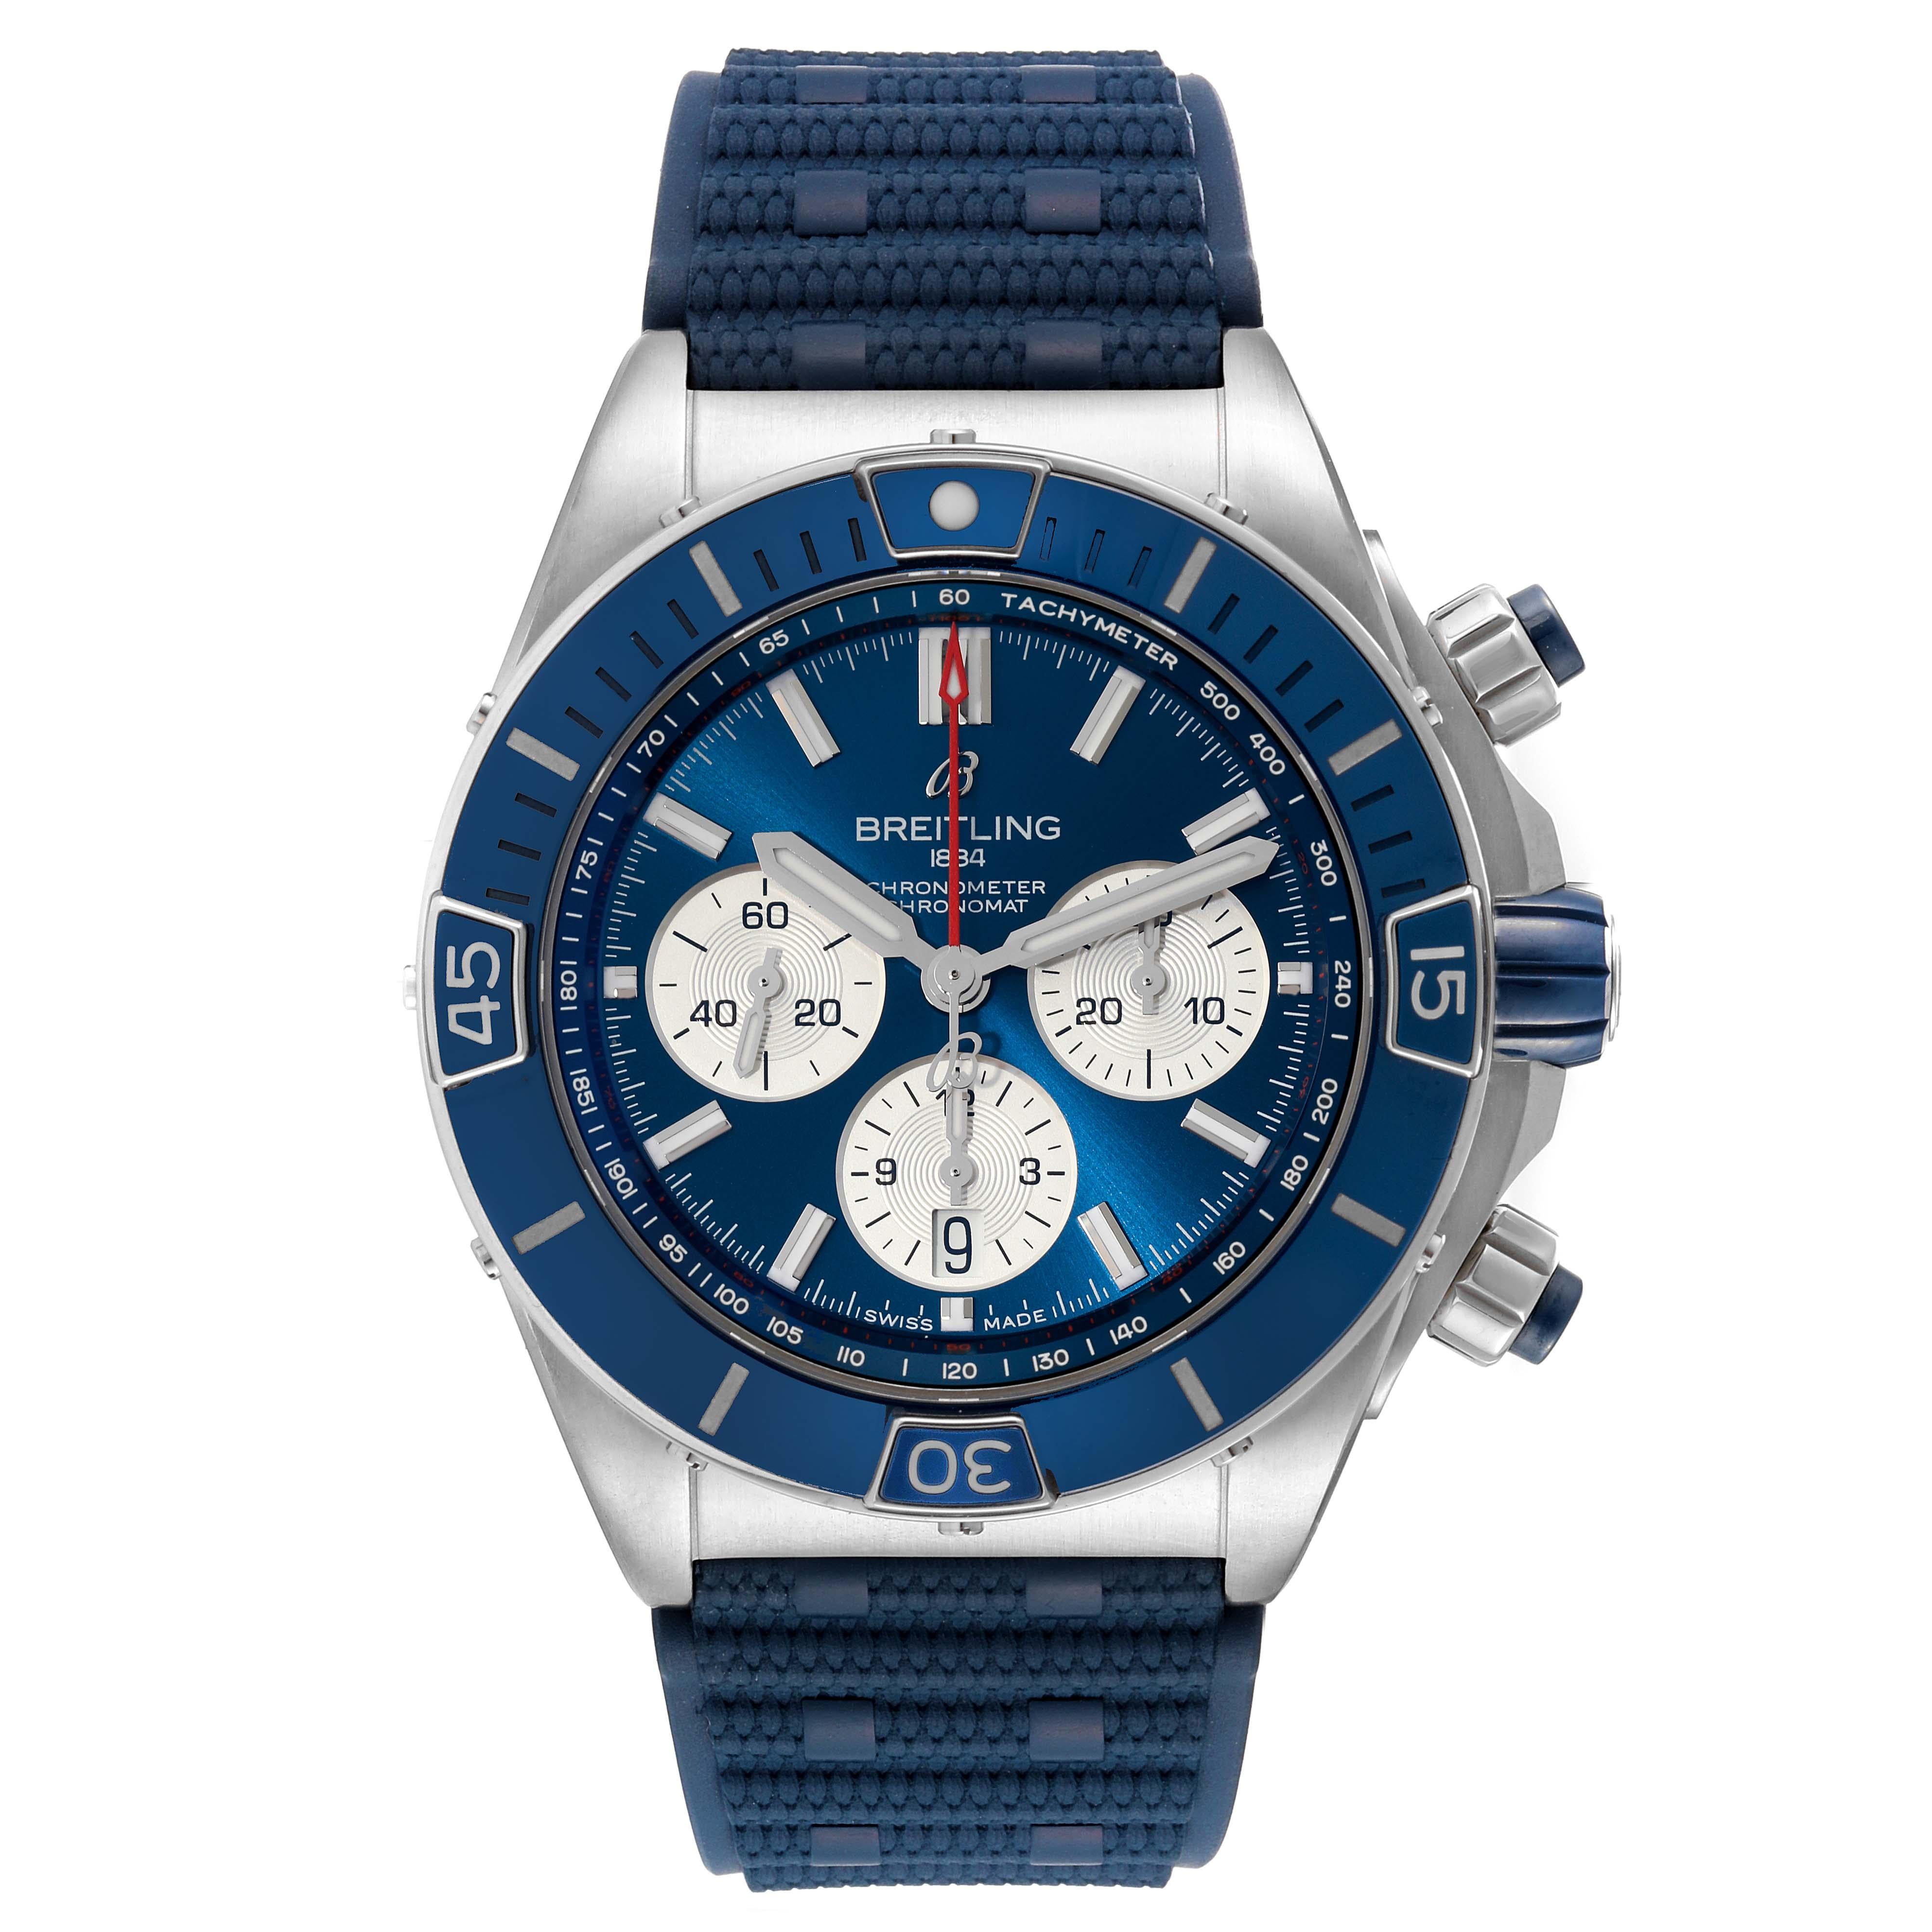 Breitling Super Chronomat B01 Blue Dial Steel Mens Watch AB0136 Box Card. Self-winding automatic officially certified chronometer movement. Chronograph function. Stainless steel case 44.0 mm in diameter with screwed down crown and pushers. GMT